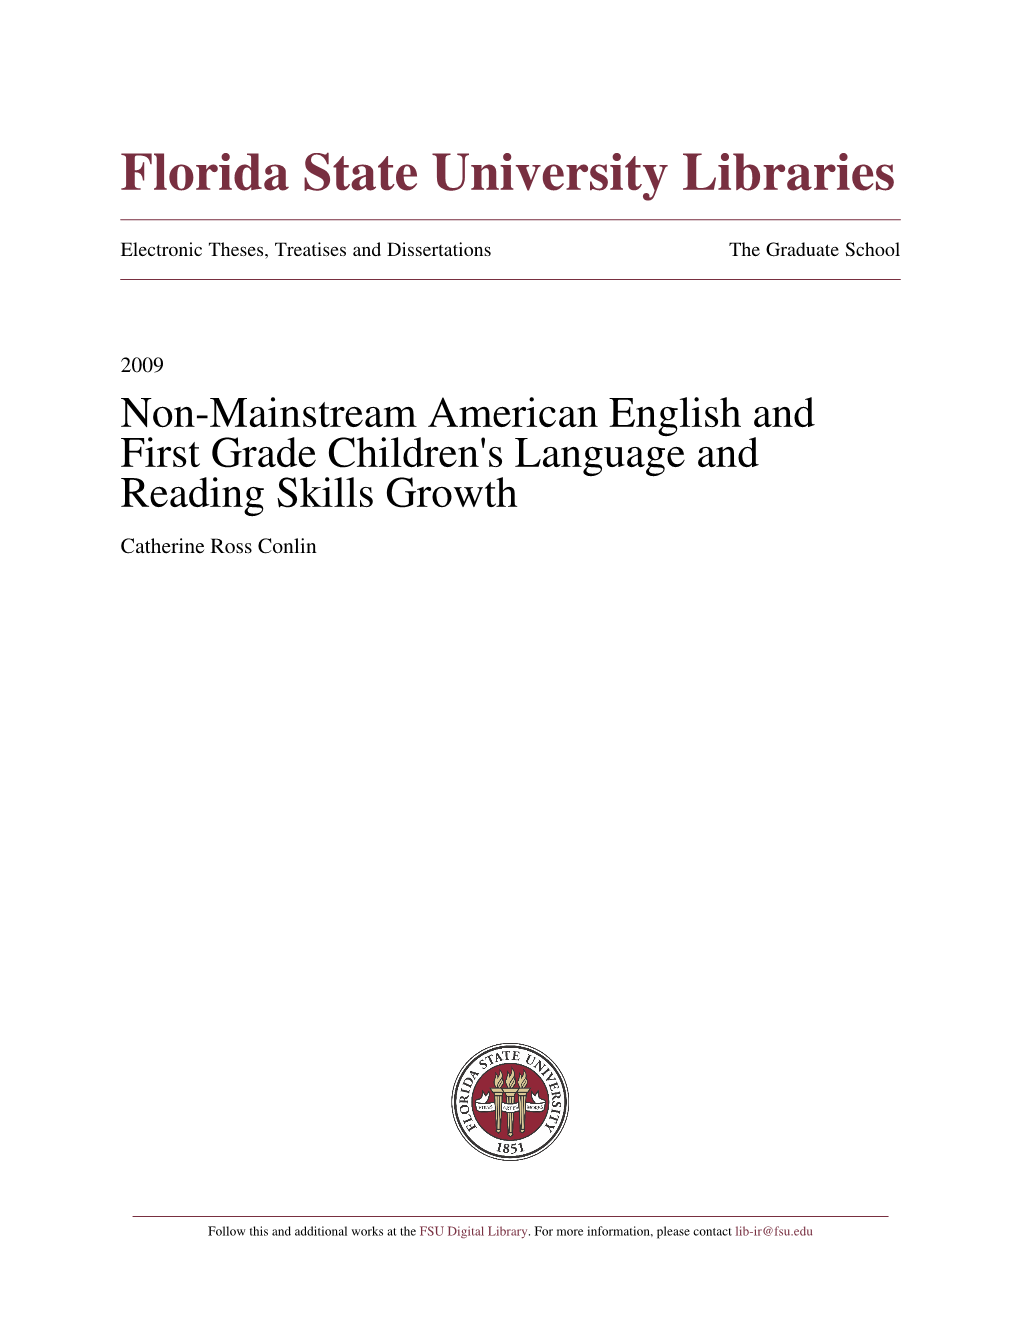 Non-Mainstream American English and First Grade Children's Language and Reading Skills Growth Catherine Ross Conlin